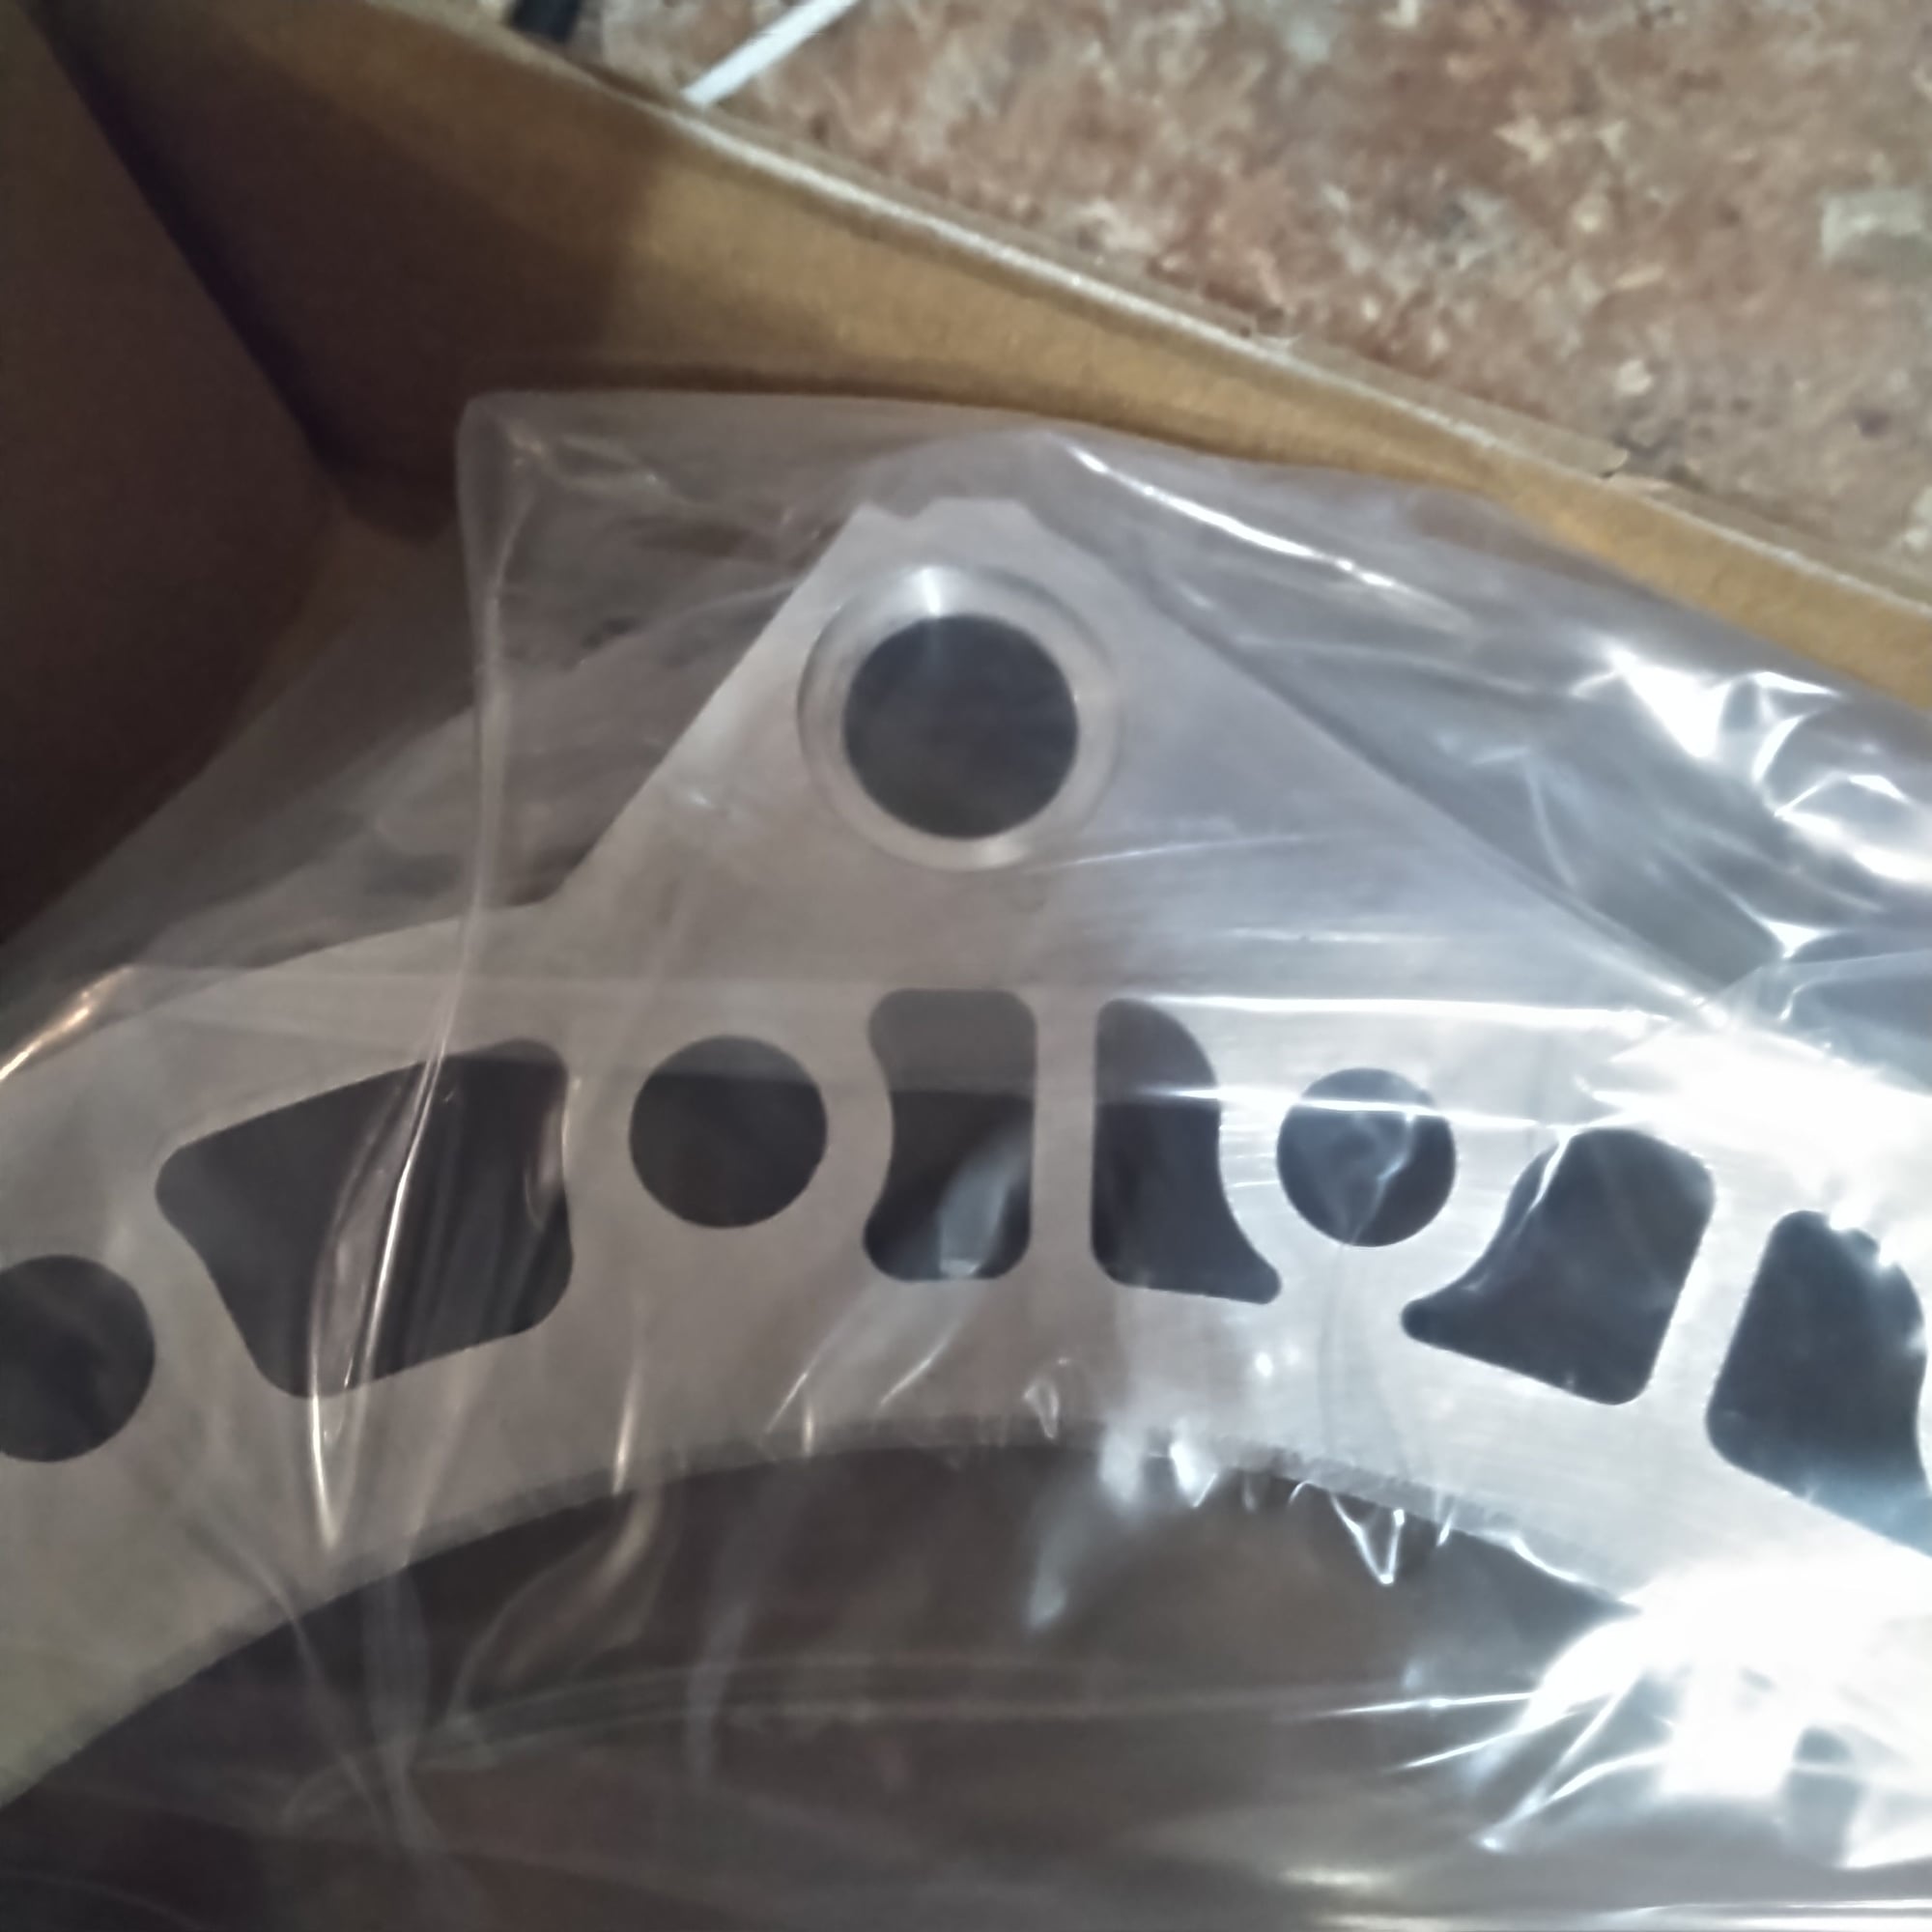 Drivetrain - Brand new fd front rotor housing - Used - 1993 to 1995 Mazda RX-7 - Woodhaven, NY 11421, United States